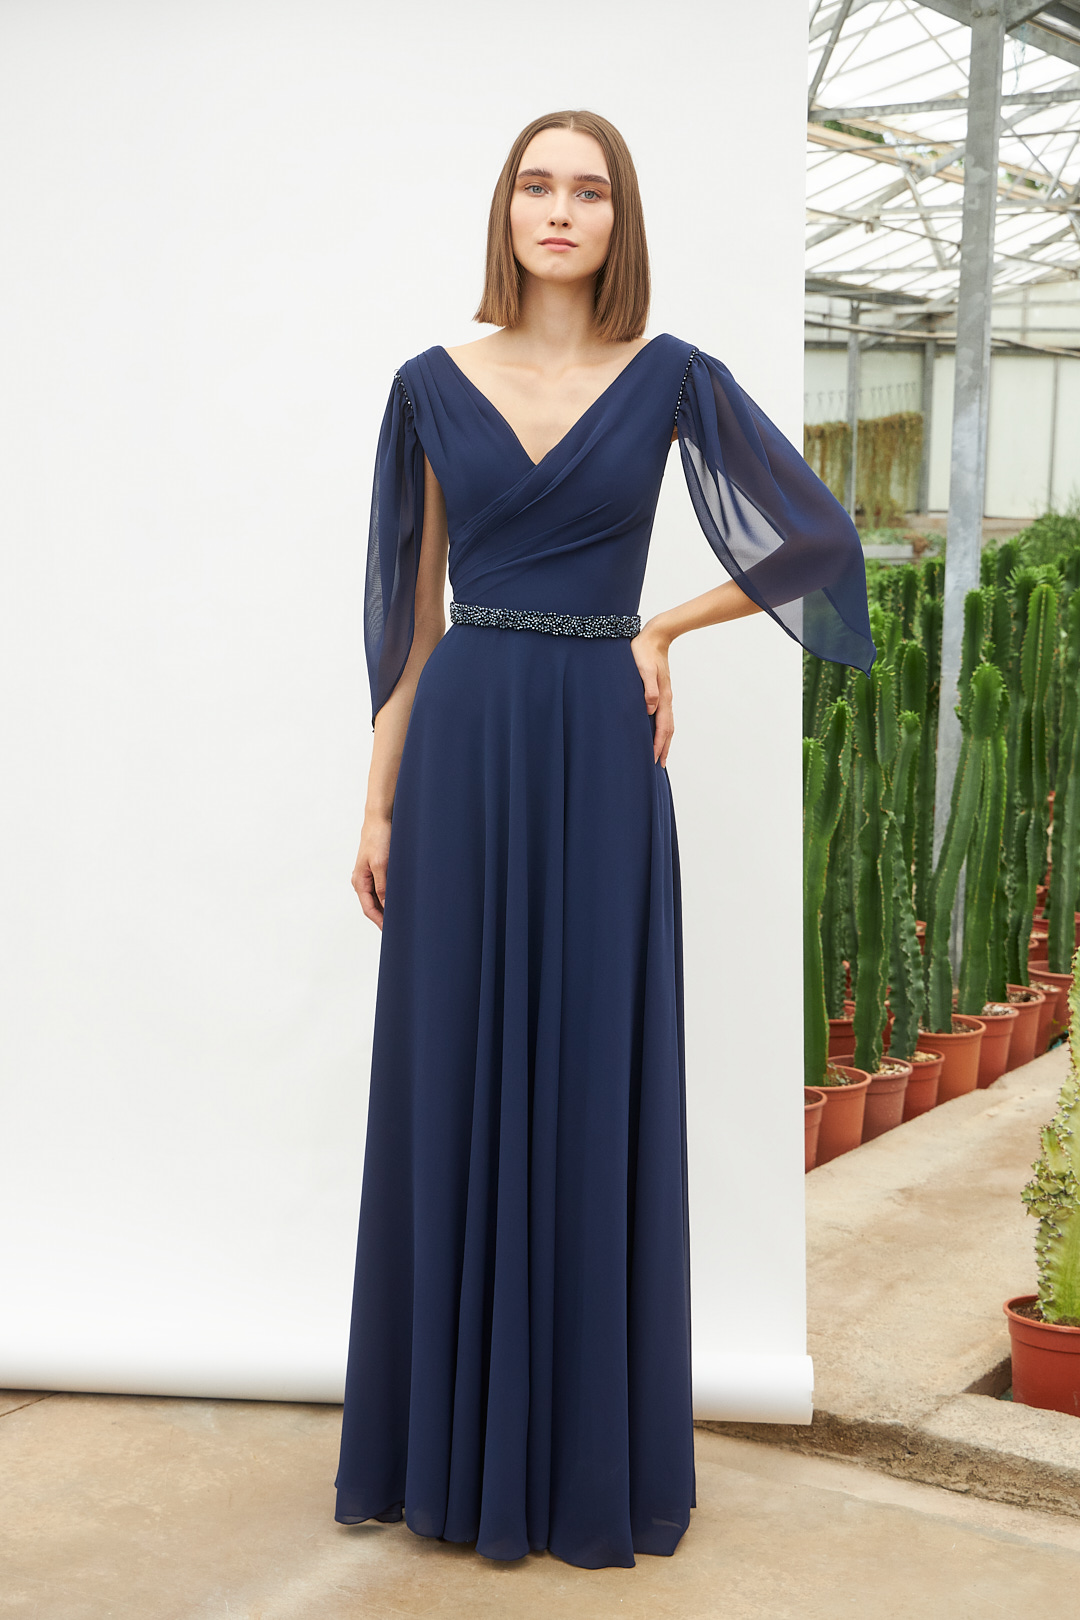 Classic Dresses / Long classic chiffon dress with beading at the waist and sleeves